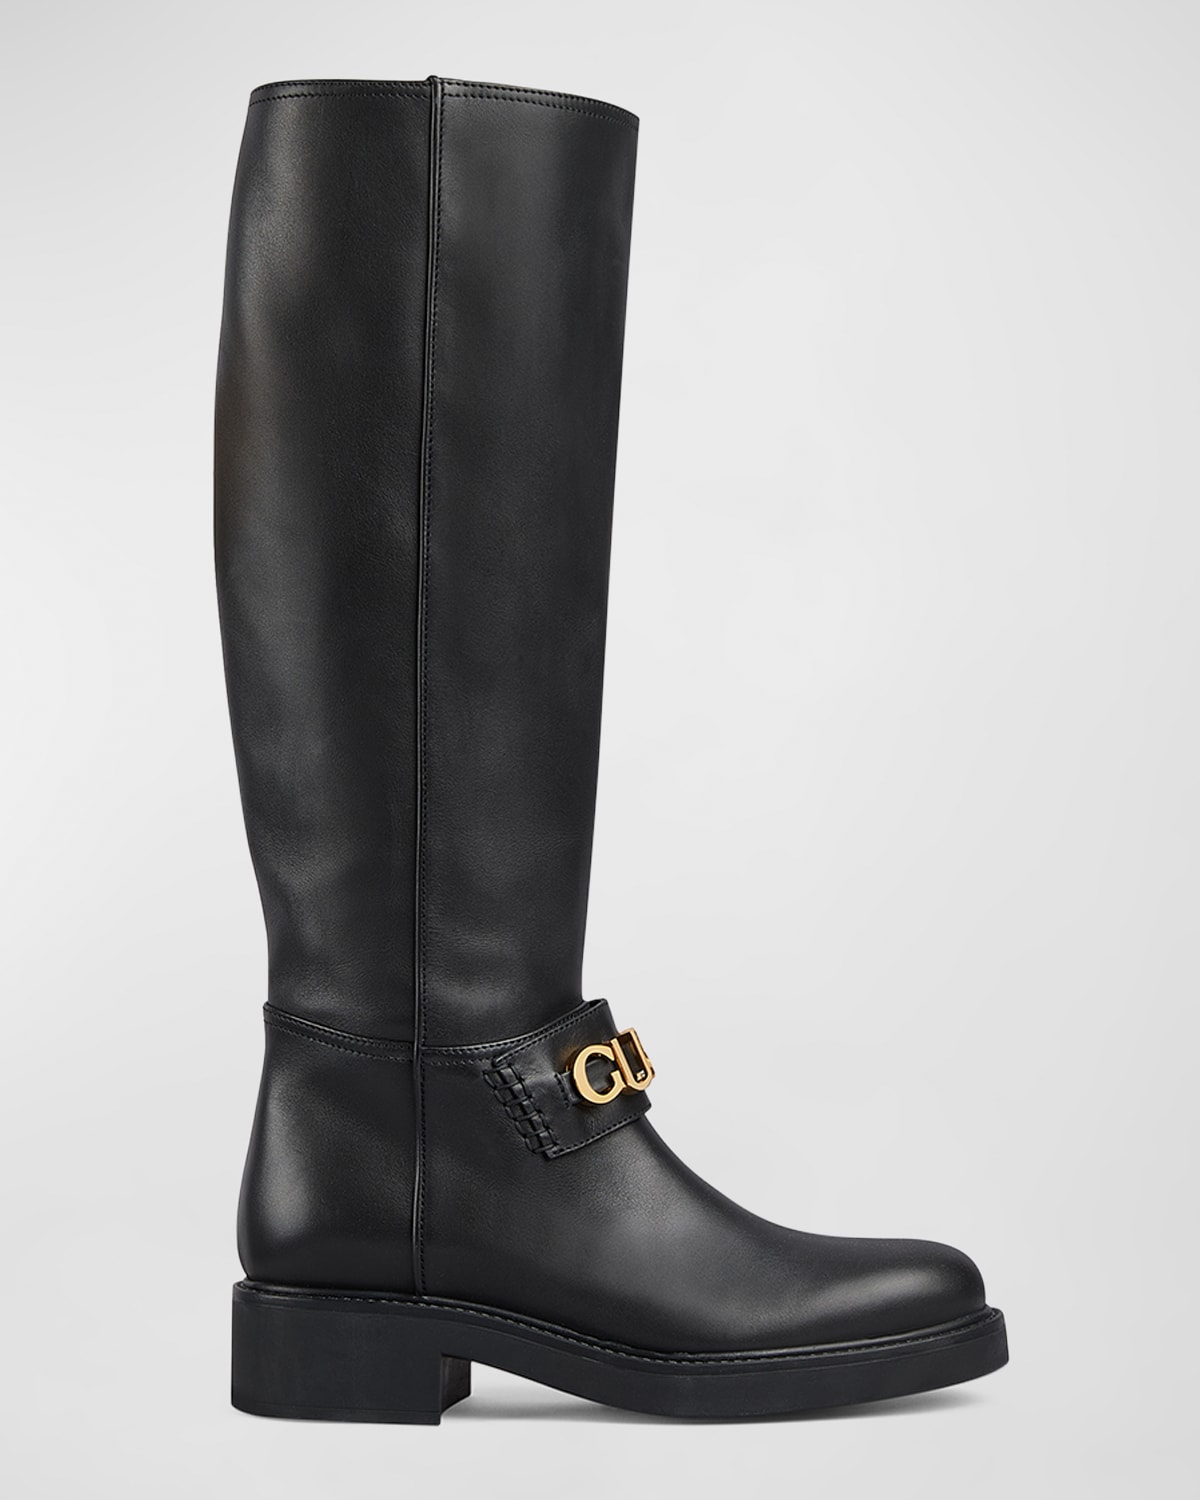 GUCCI CARA LOGO LEATHER RIDING BOOTS